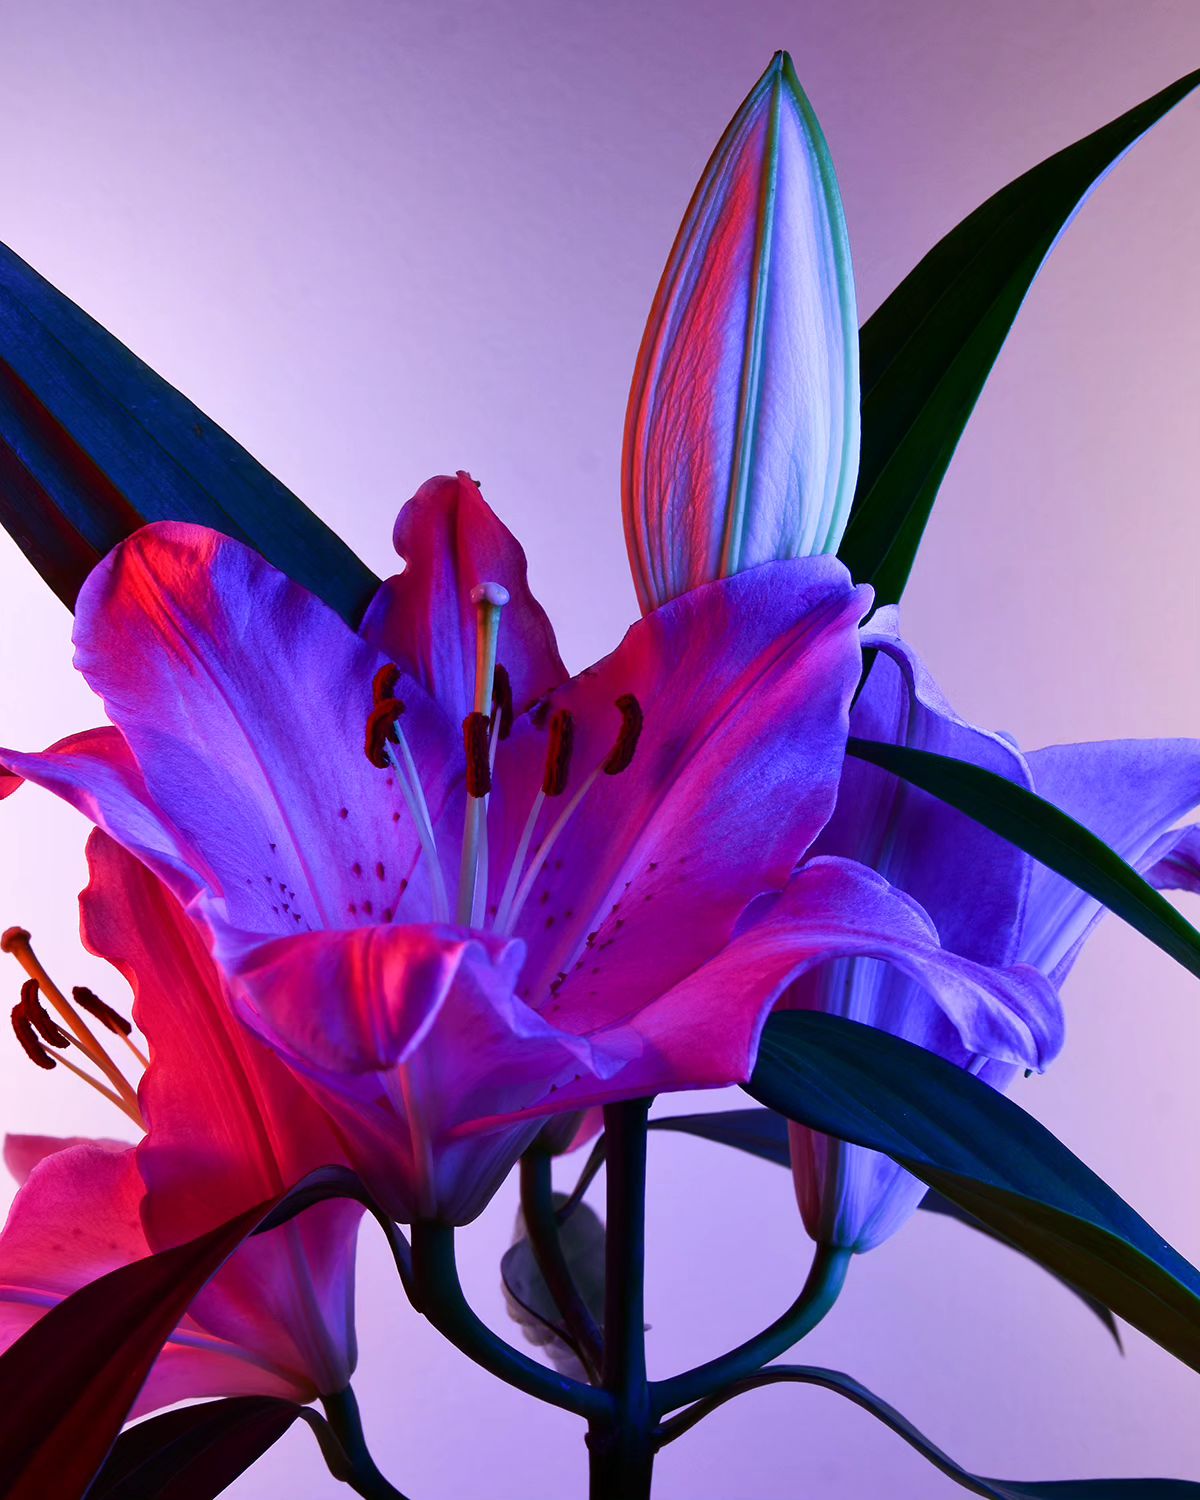 Deflowered, A Floral Photography Series By William Josephs Radford (9)